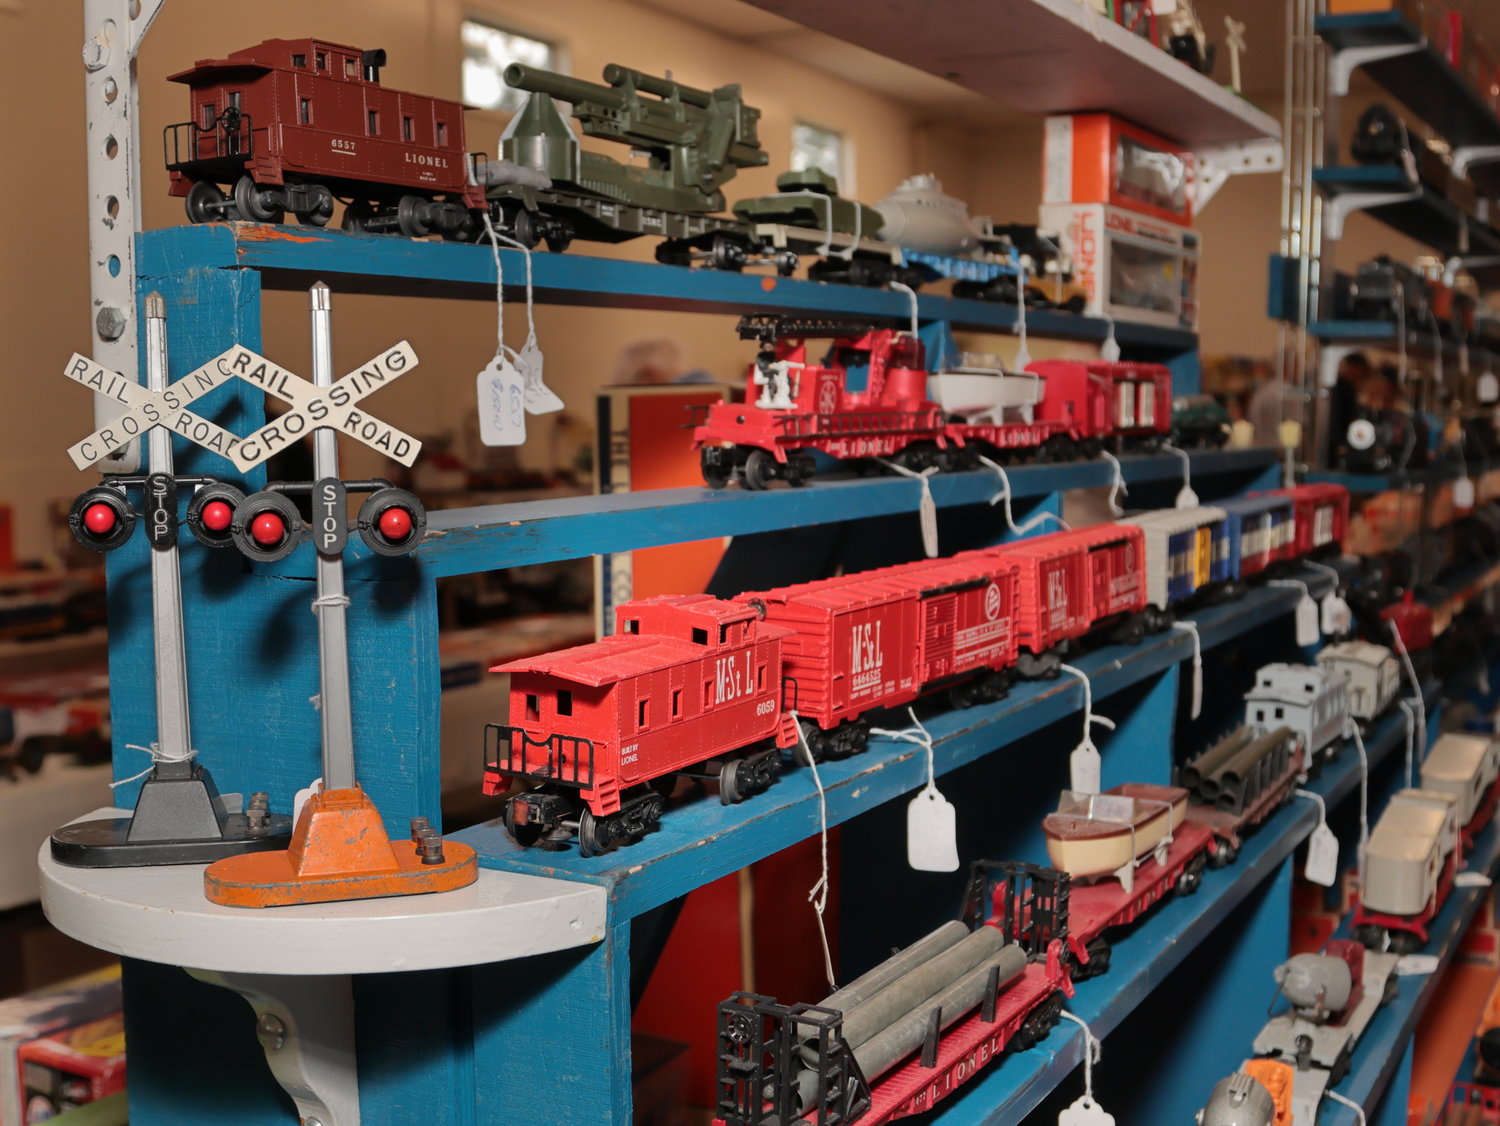 A small sampling of the many items available at the Model Train Show and Sale, hosted by the Hawley Fire Department.